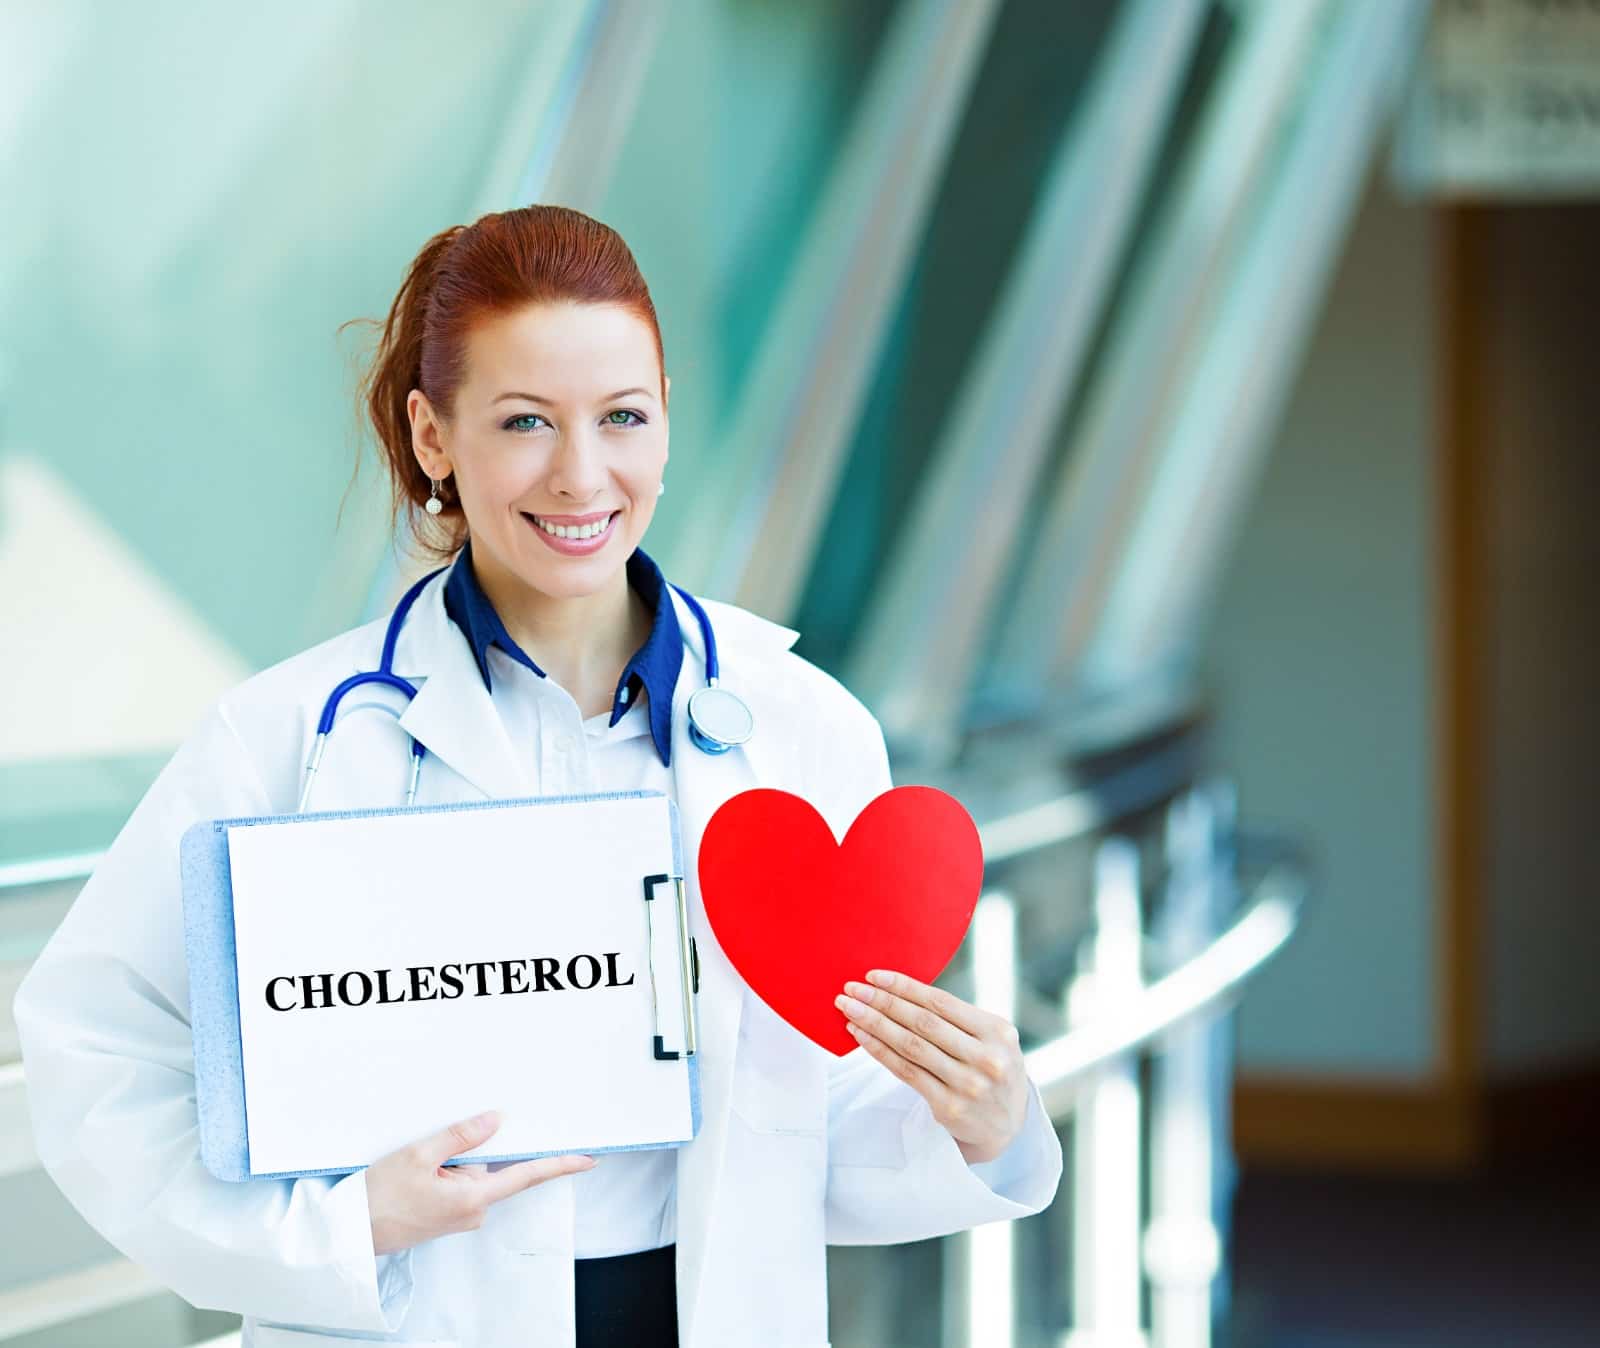 cholesterol-blood-testing-is-it-vital-for-you-health